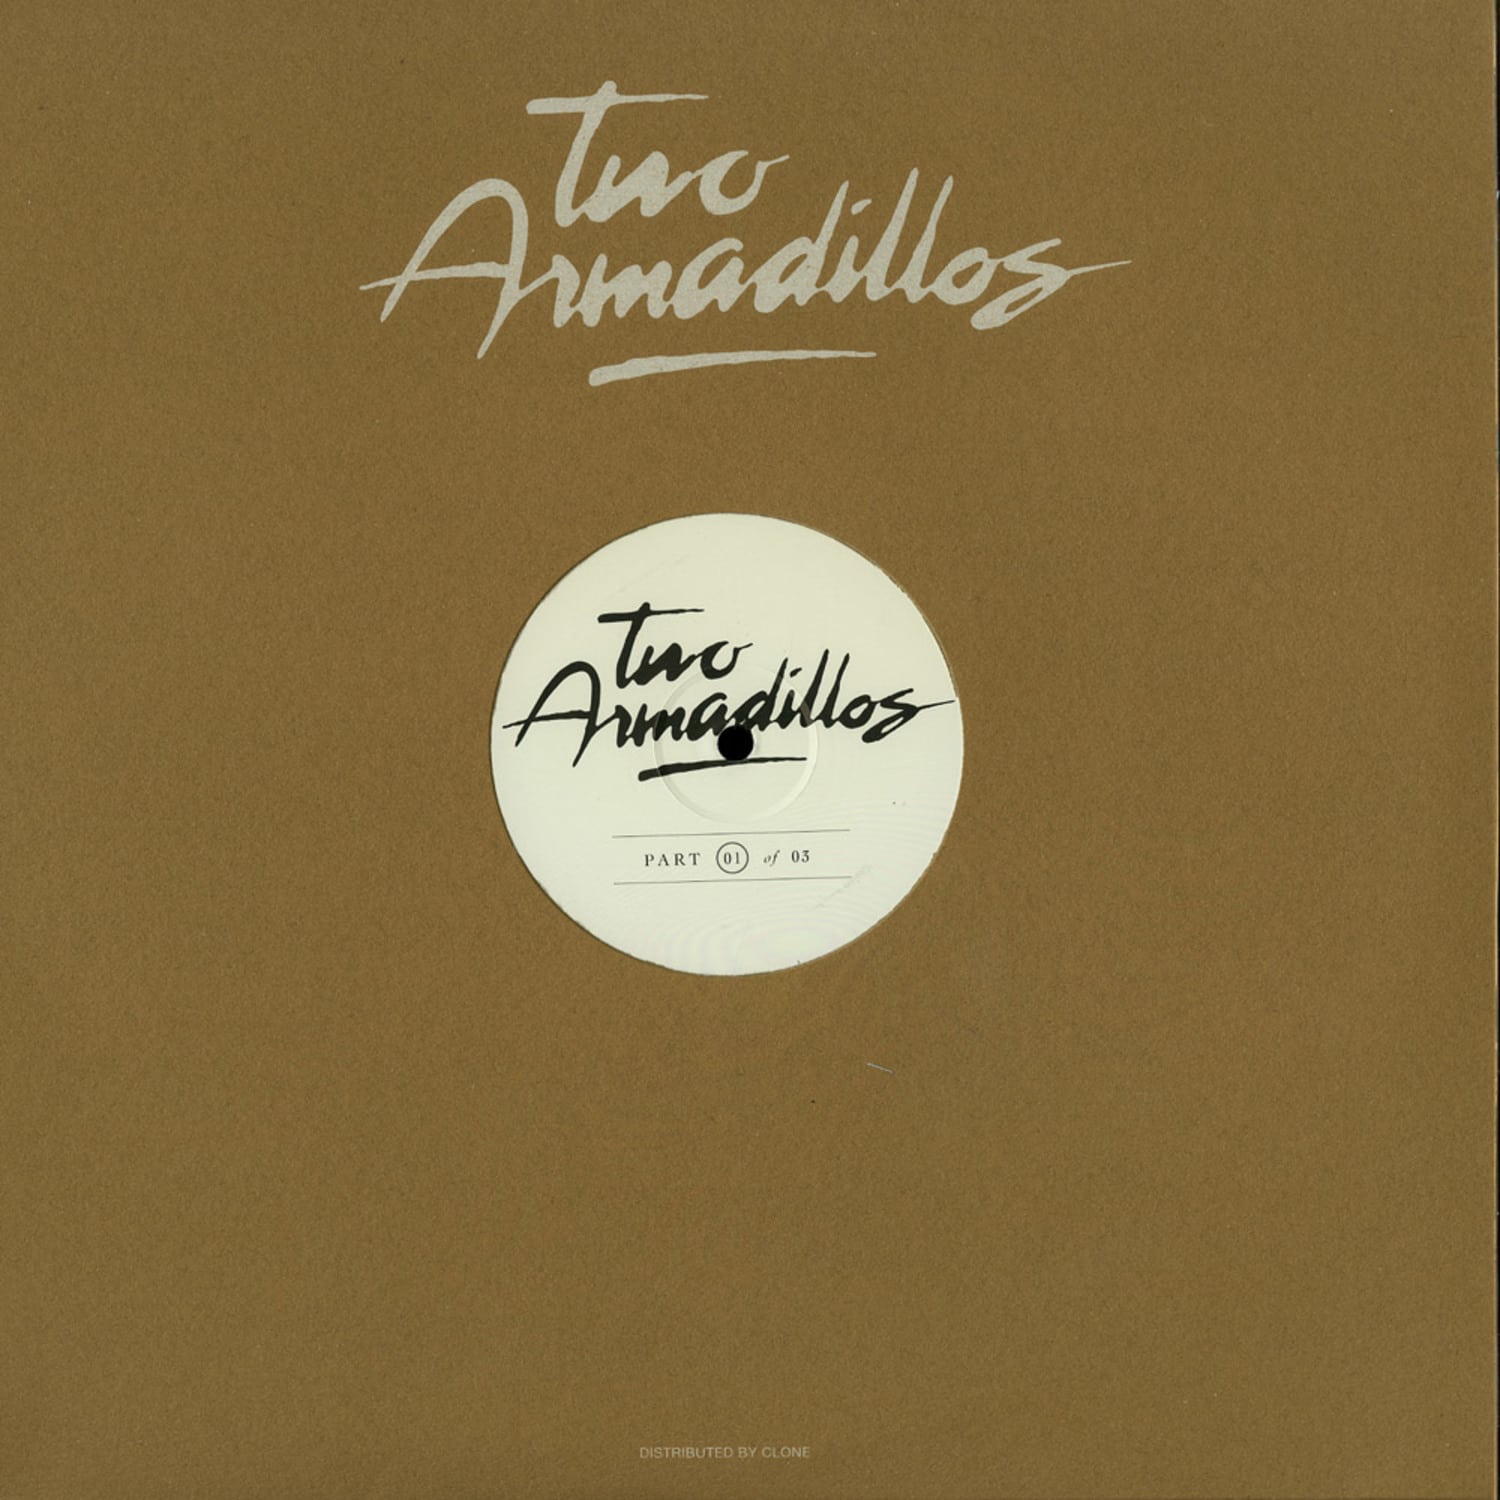 Two Armadillos - GOLDEN AGE THINKING PART 1